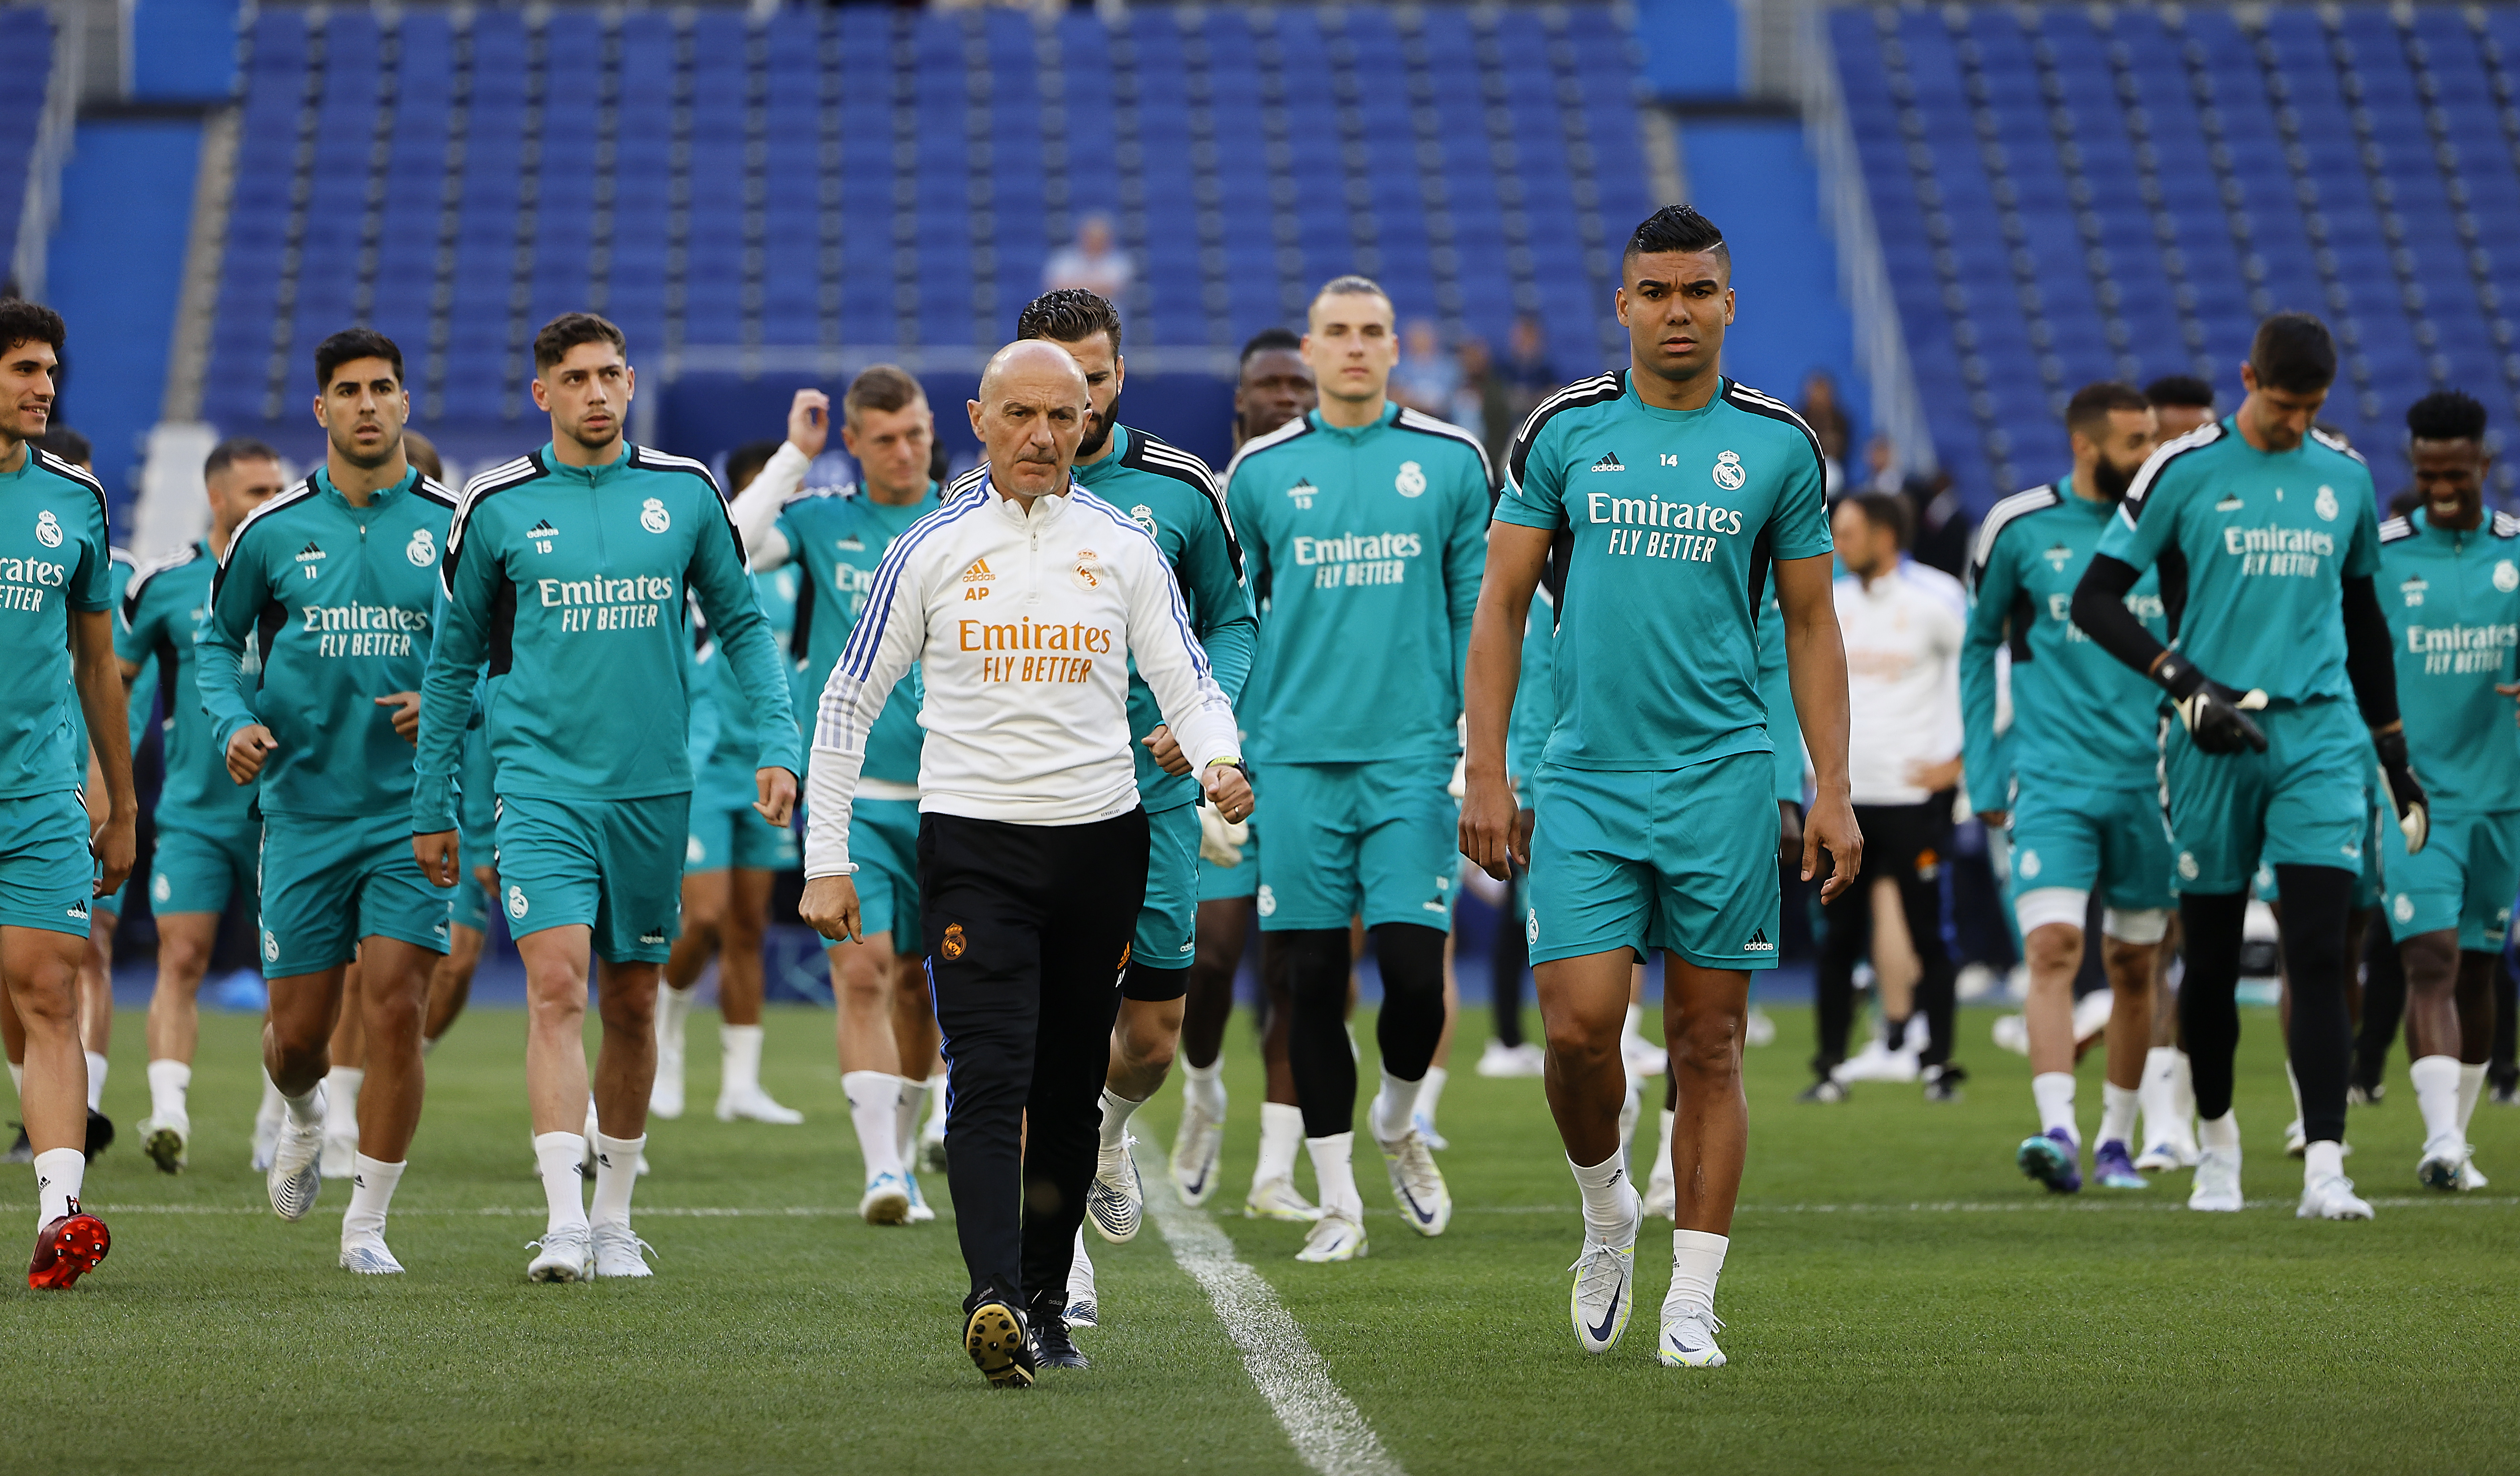 Real Madrid Training Session And Press Conference - UEFA Champions League Final 2021/22